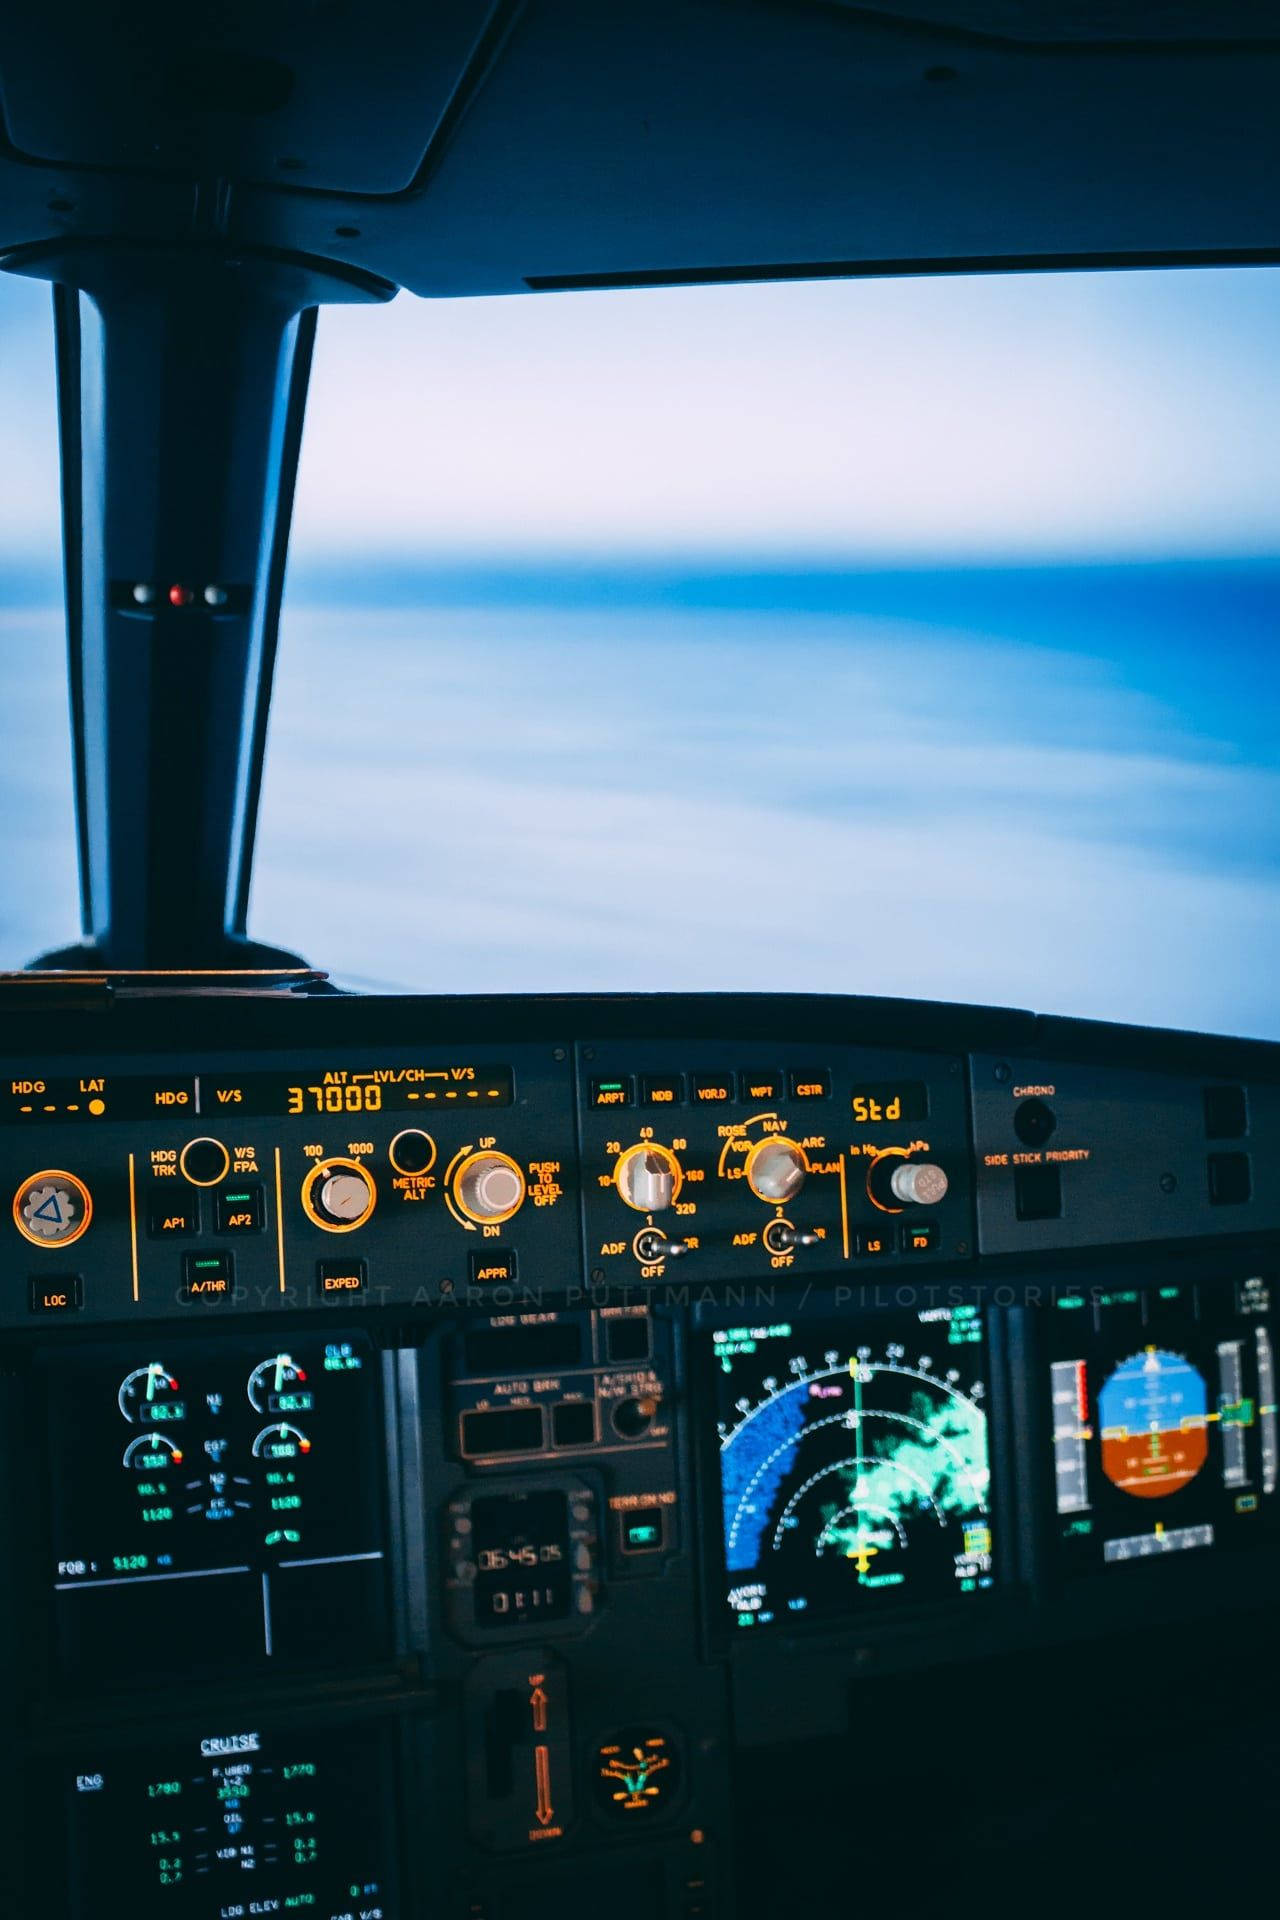 Navigating Skies: A Look At The Airplane Android Control System